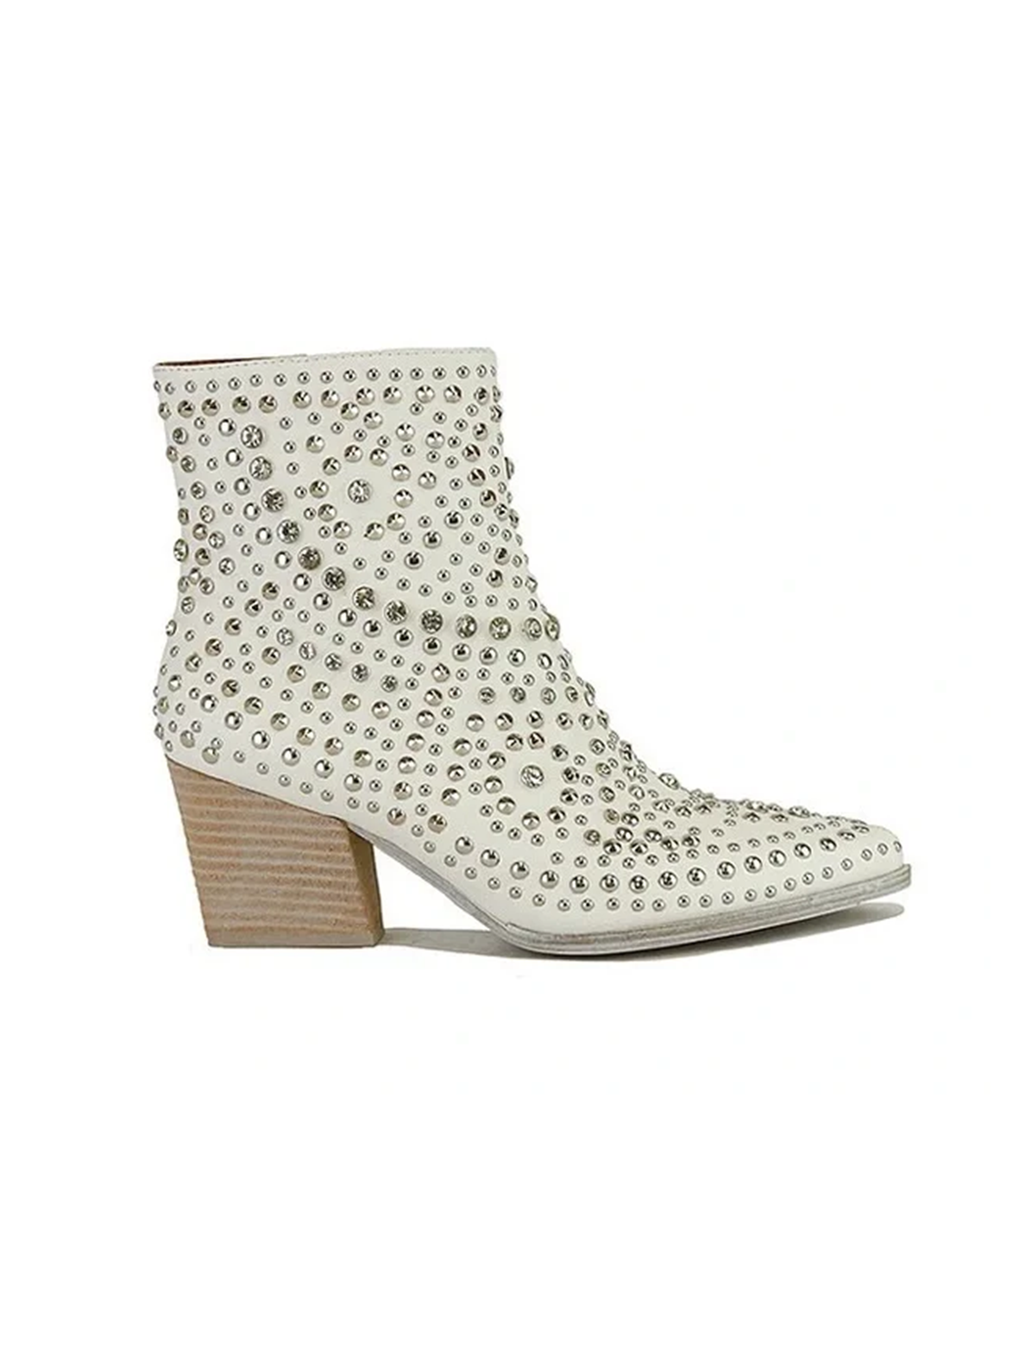 Hazel Bootie in White - Final Sale - Stitch And Feather